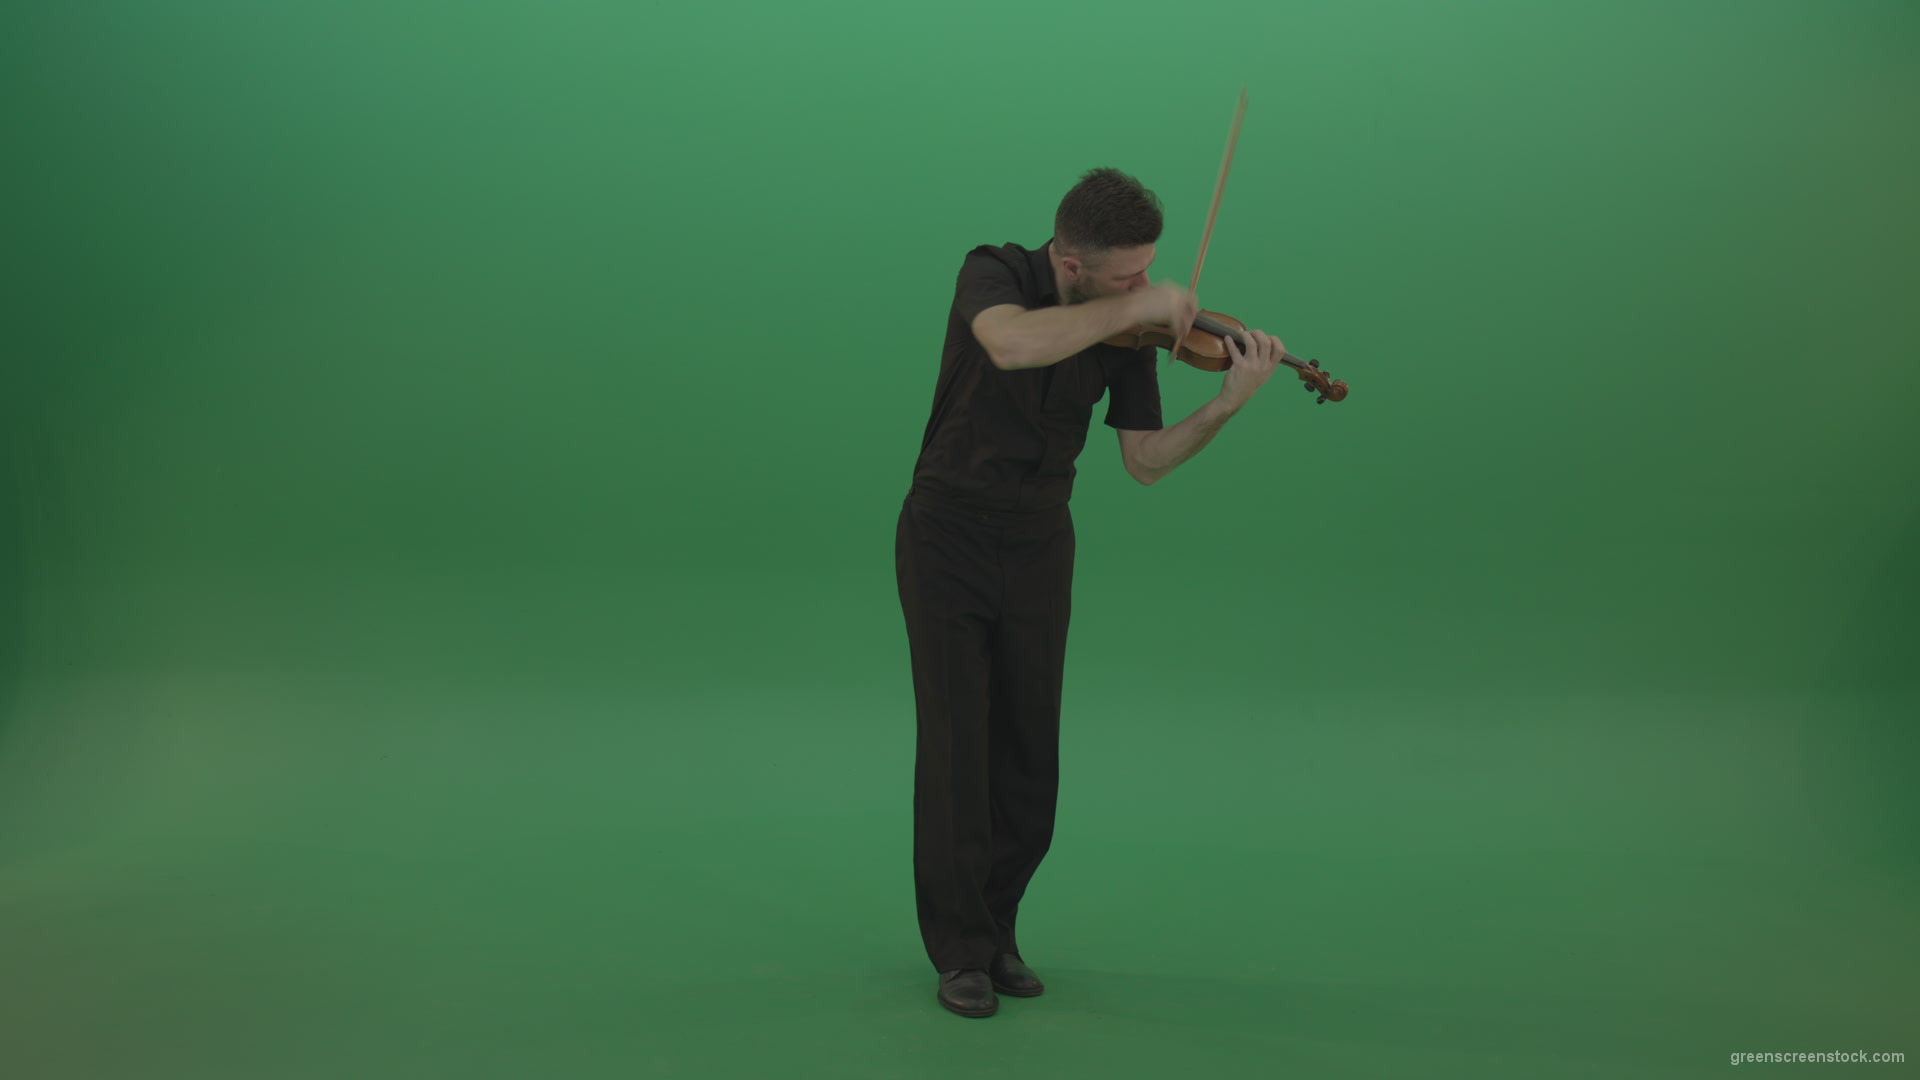 Full-size-view-virtuoso-Man-in-black-costume-play-violin-fiddle-strings-music-instument-on-green-screen_009 Green Screen Stock